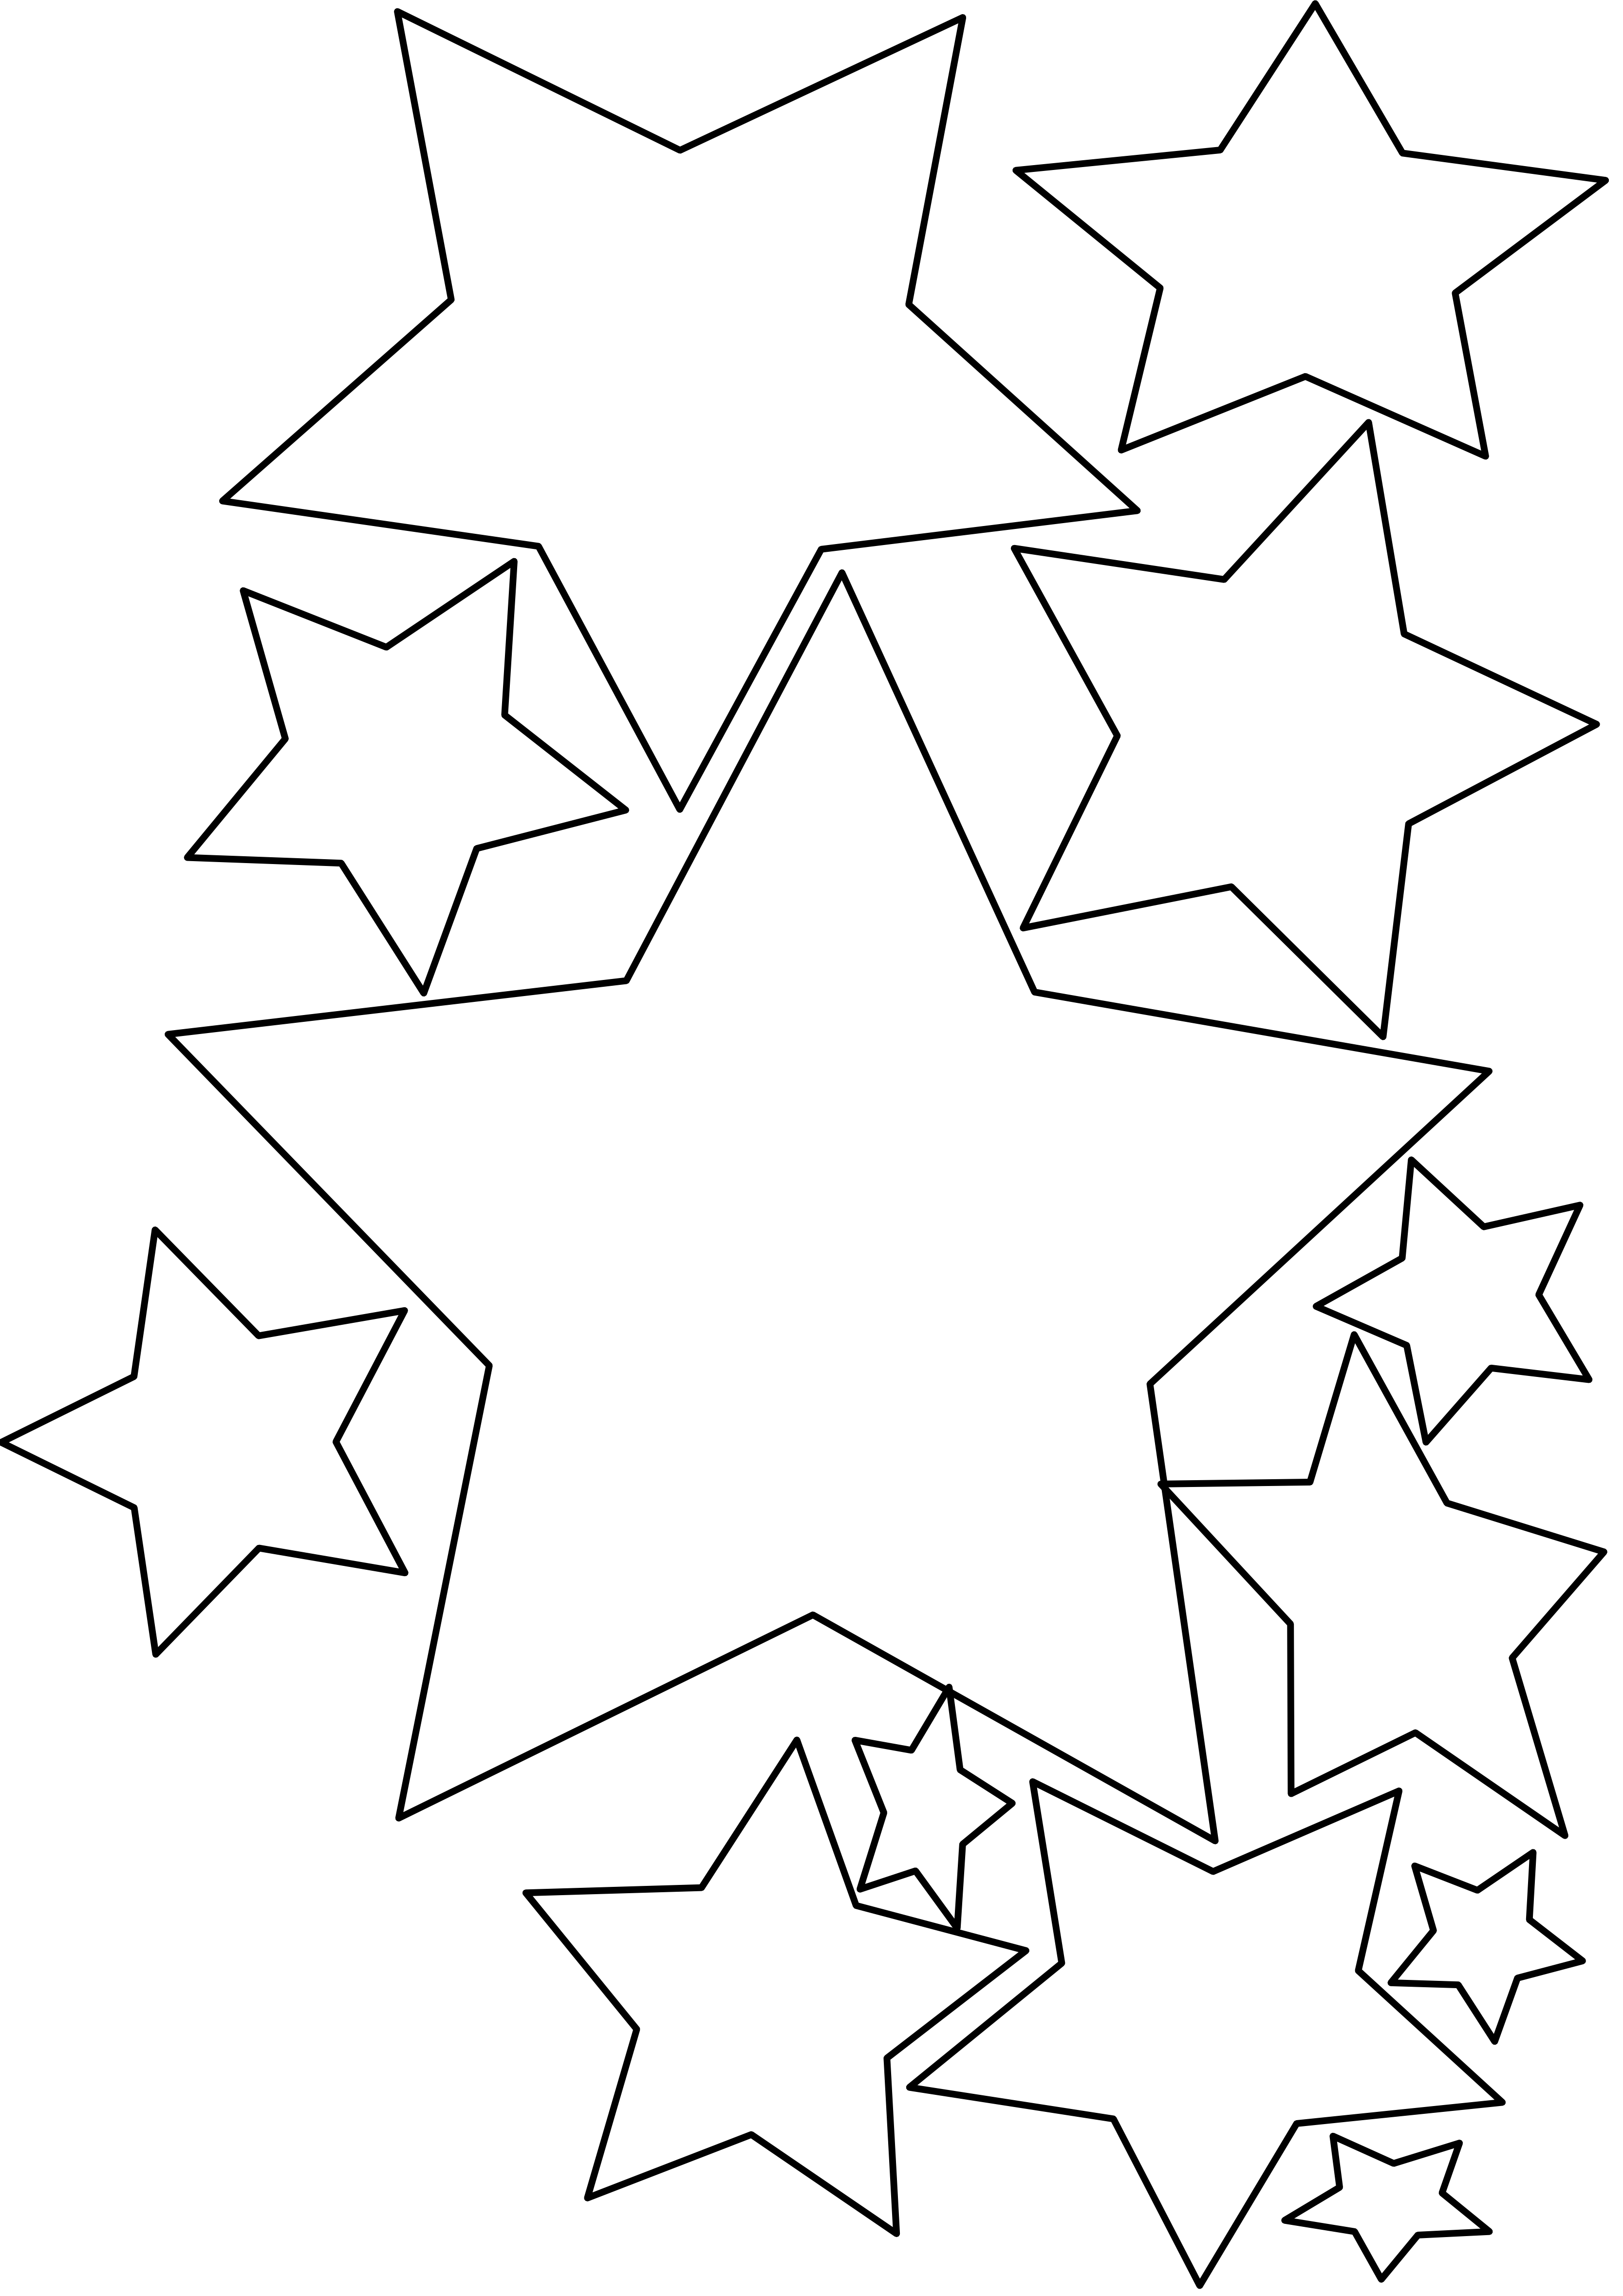 clipart star black and white